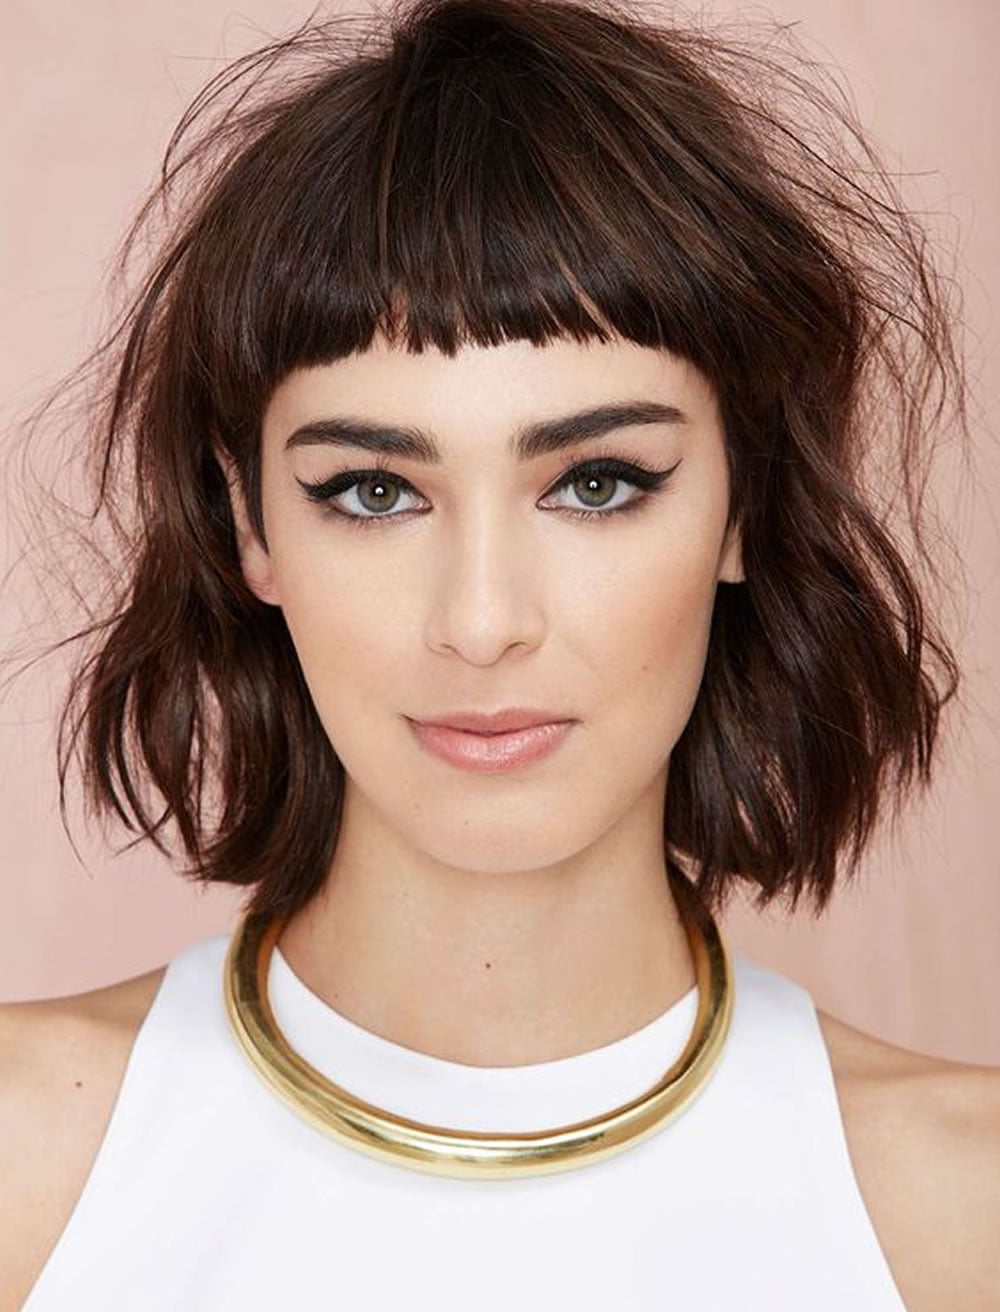 2018 short haircut trends & short hairstyle ideas for women – page 2